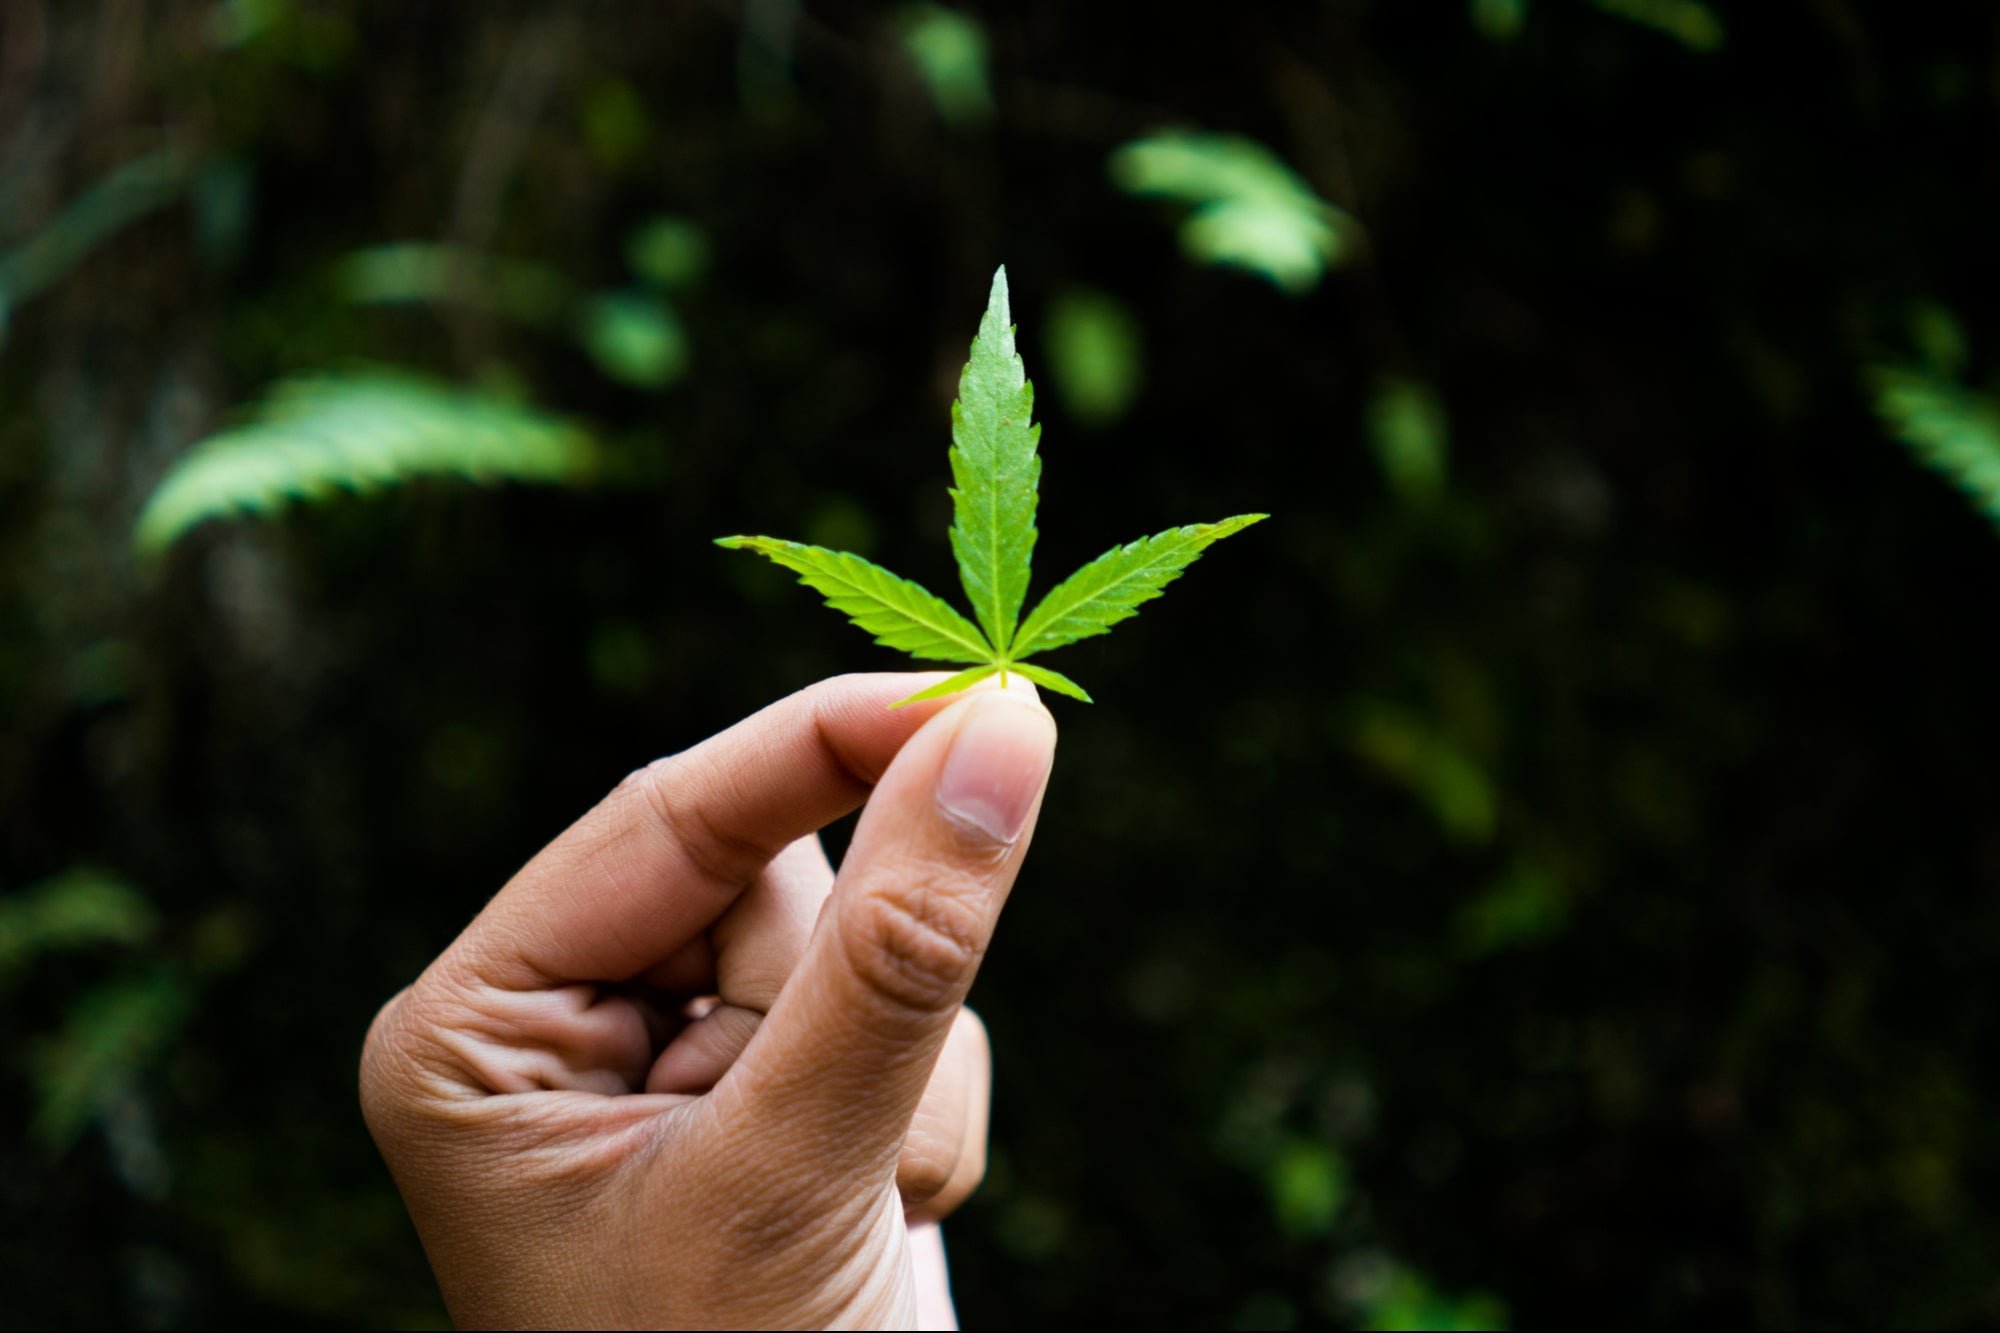 How to Seamlessly Transfer Your Skill-Set to the Cannabis Industry